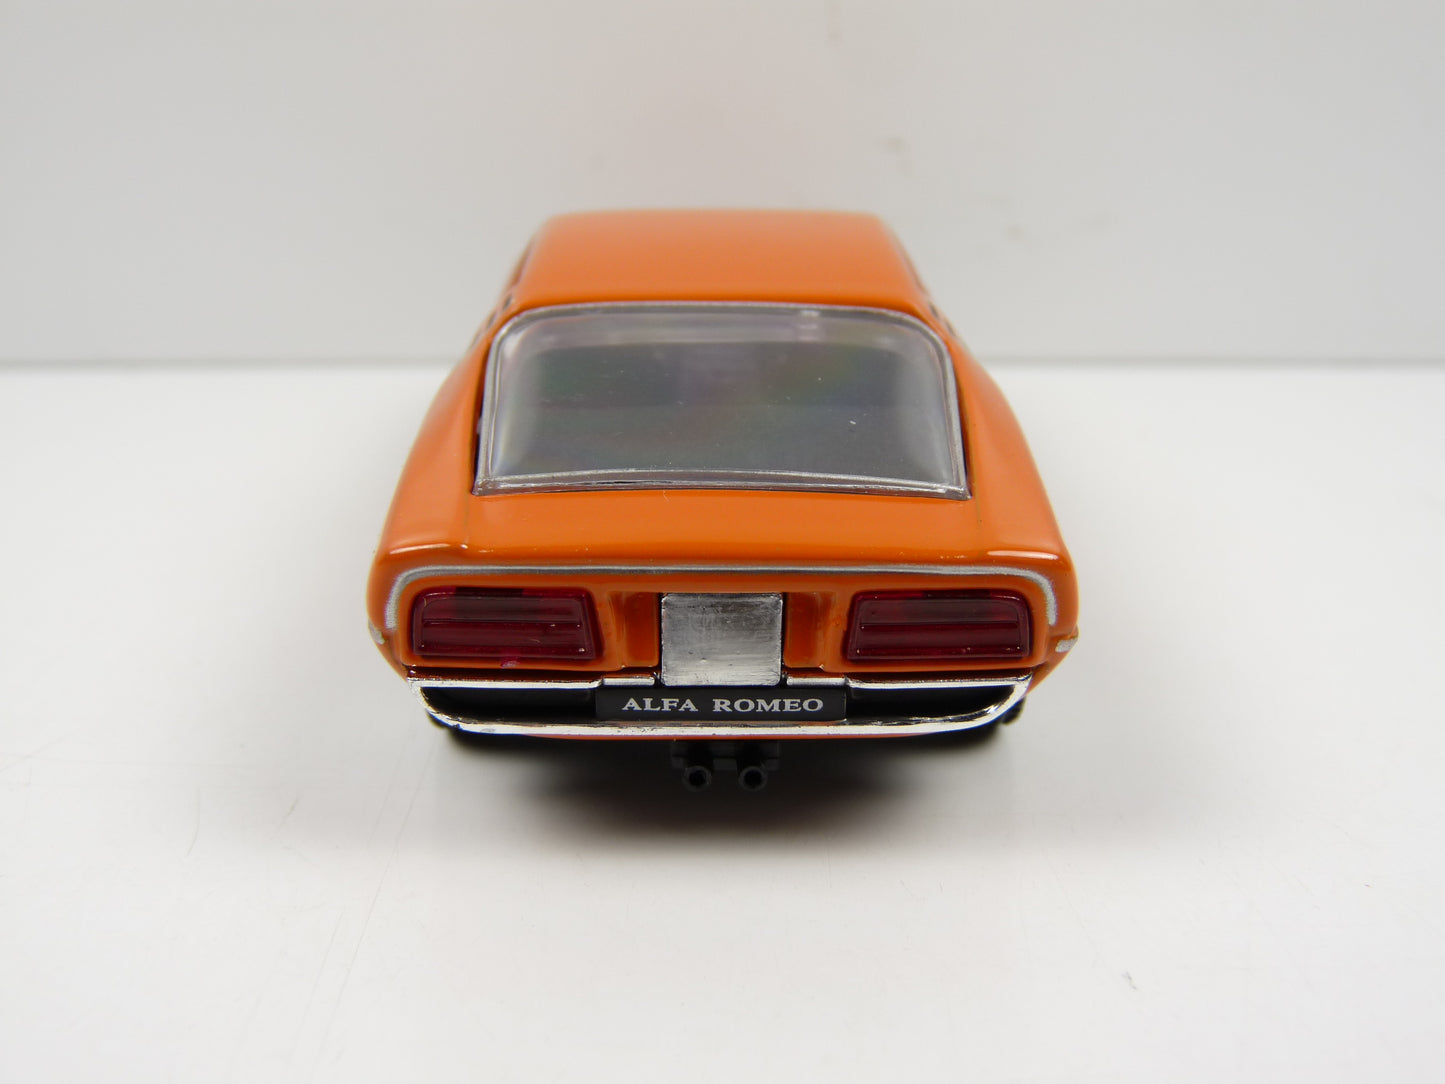 ITB0 Voiture 1/43 civile Italienne NOREV blister : ALFA ROMEO Montreal